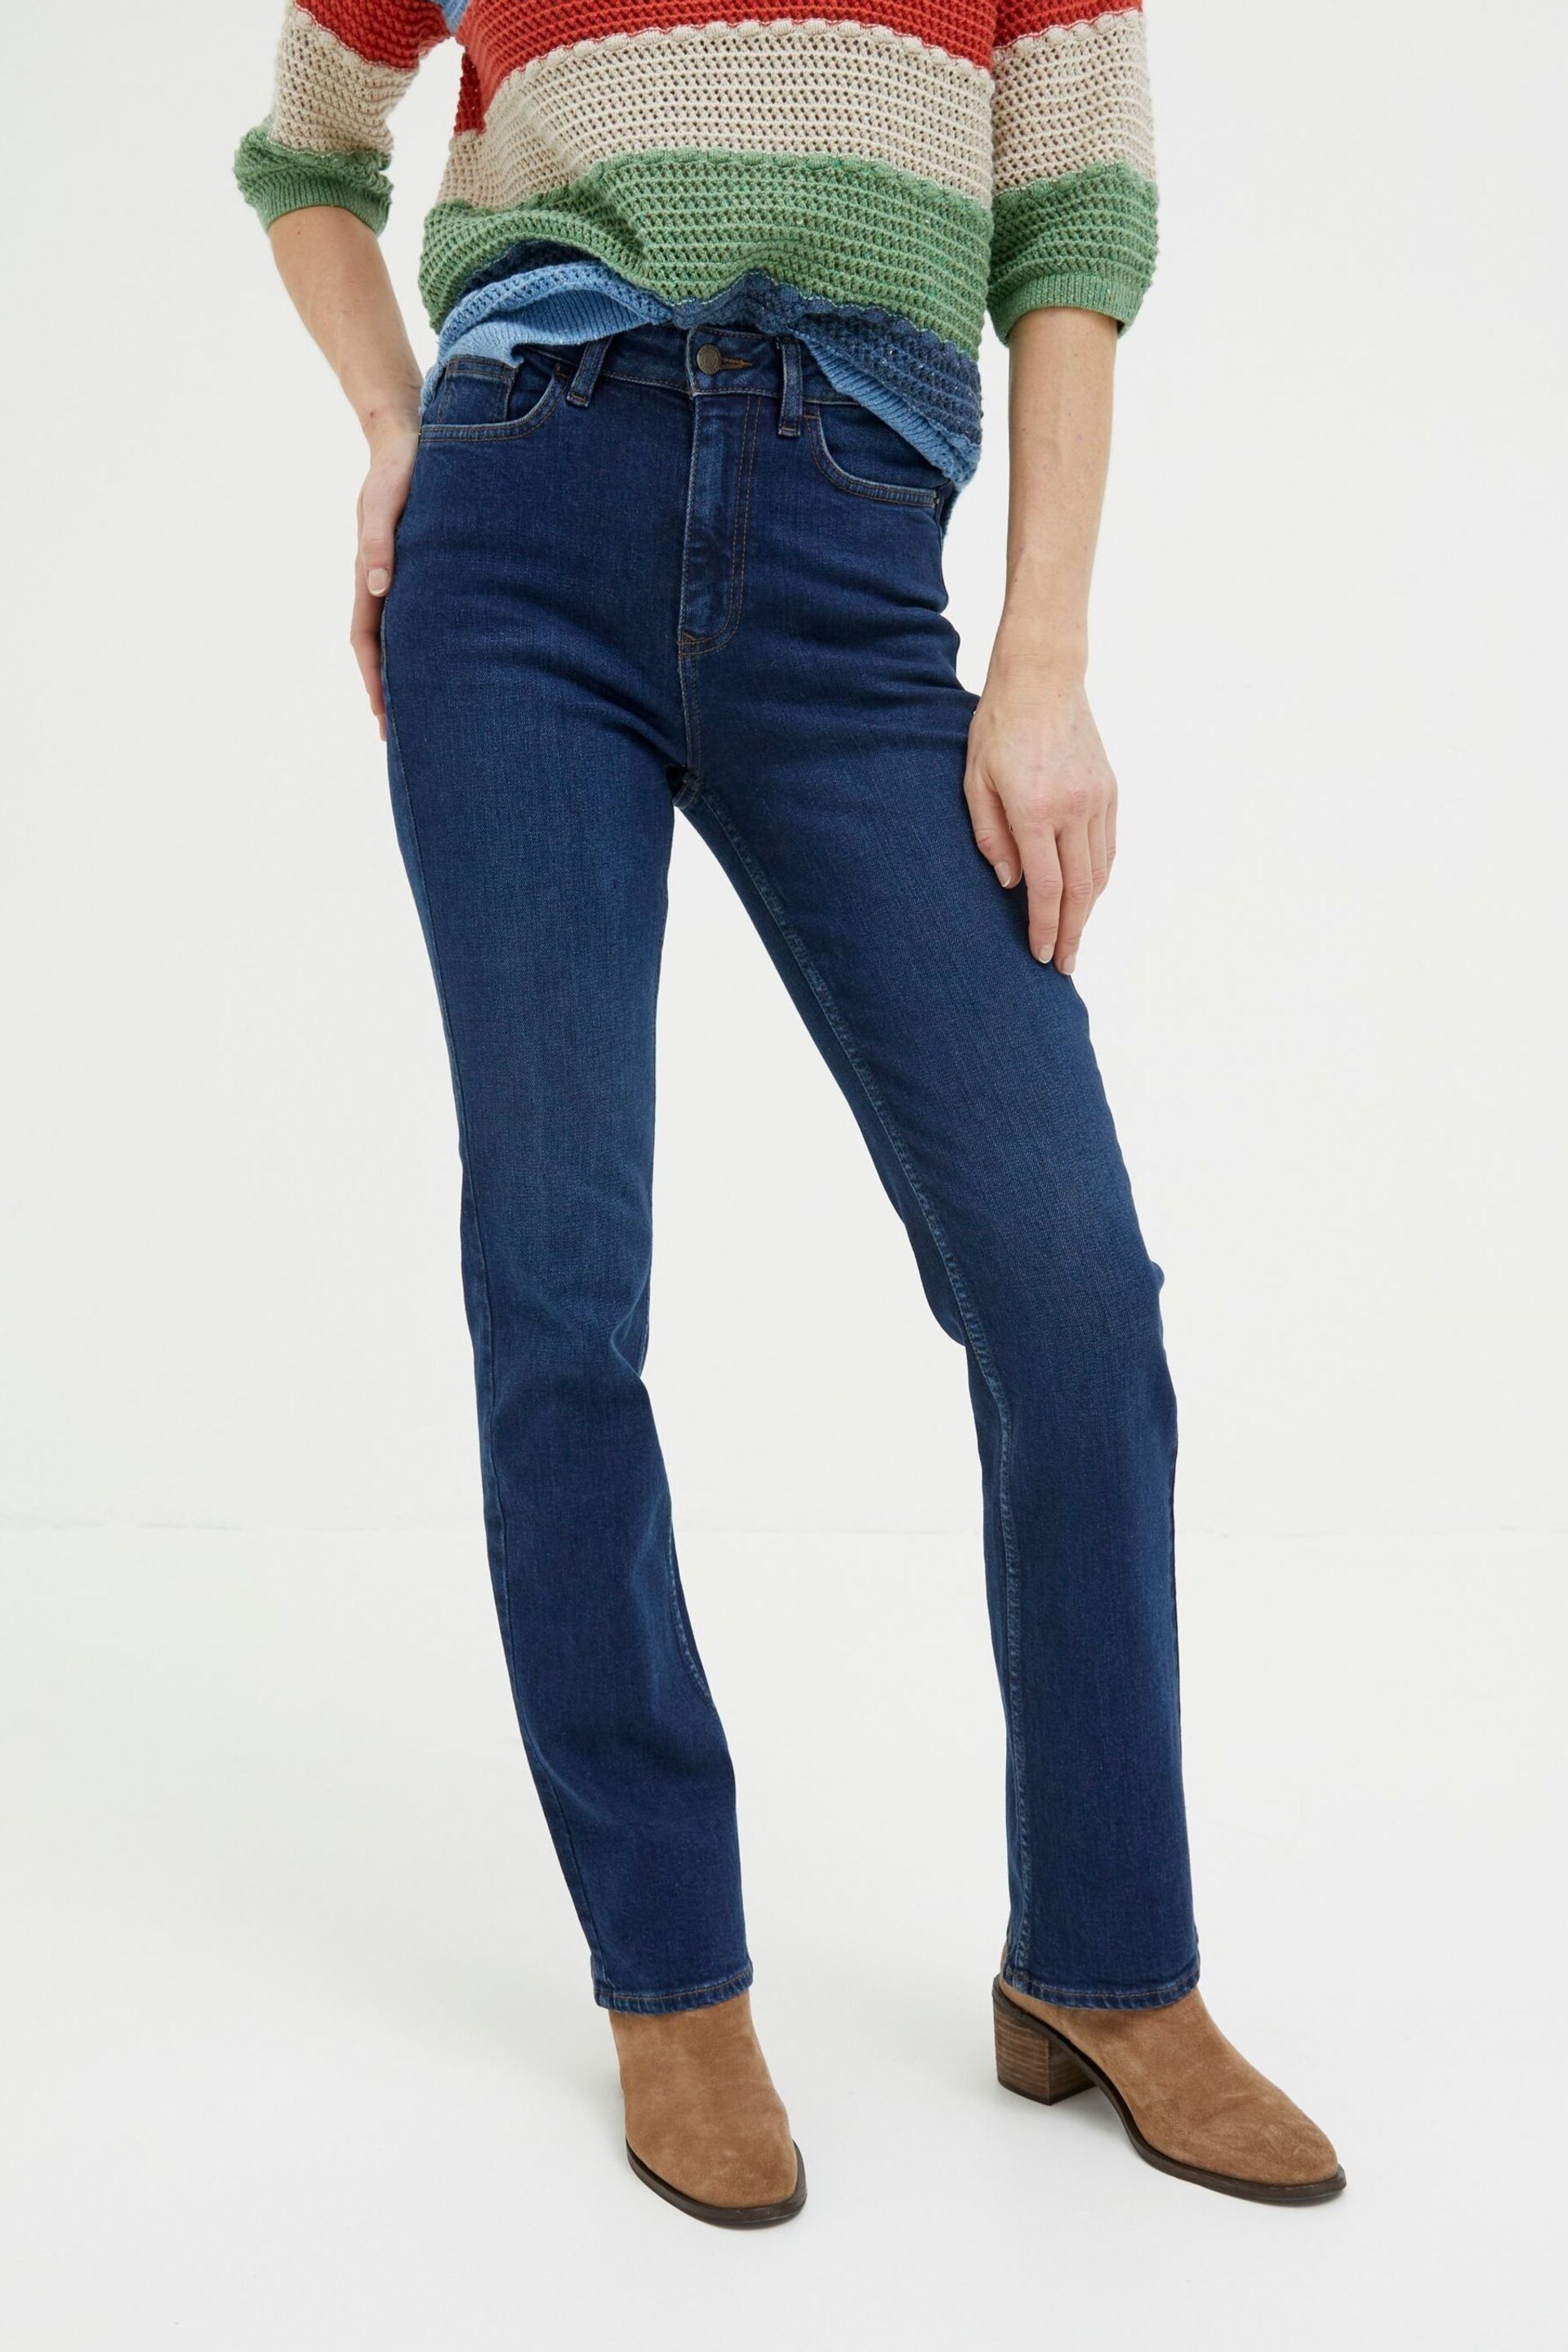 FatFace Blue Brooke Bootcut Jeans - Image 1 of 5